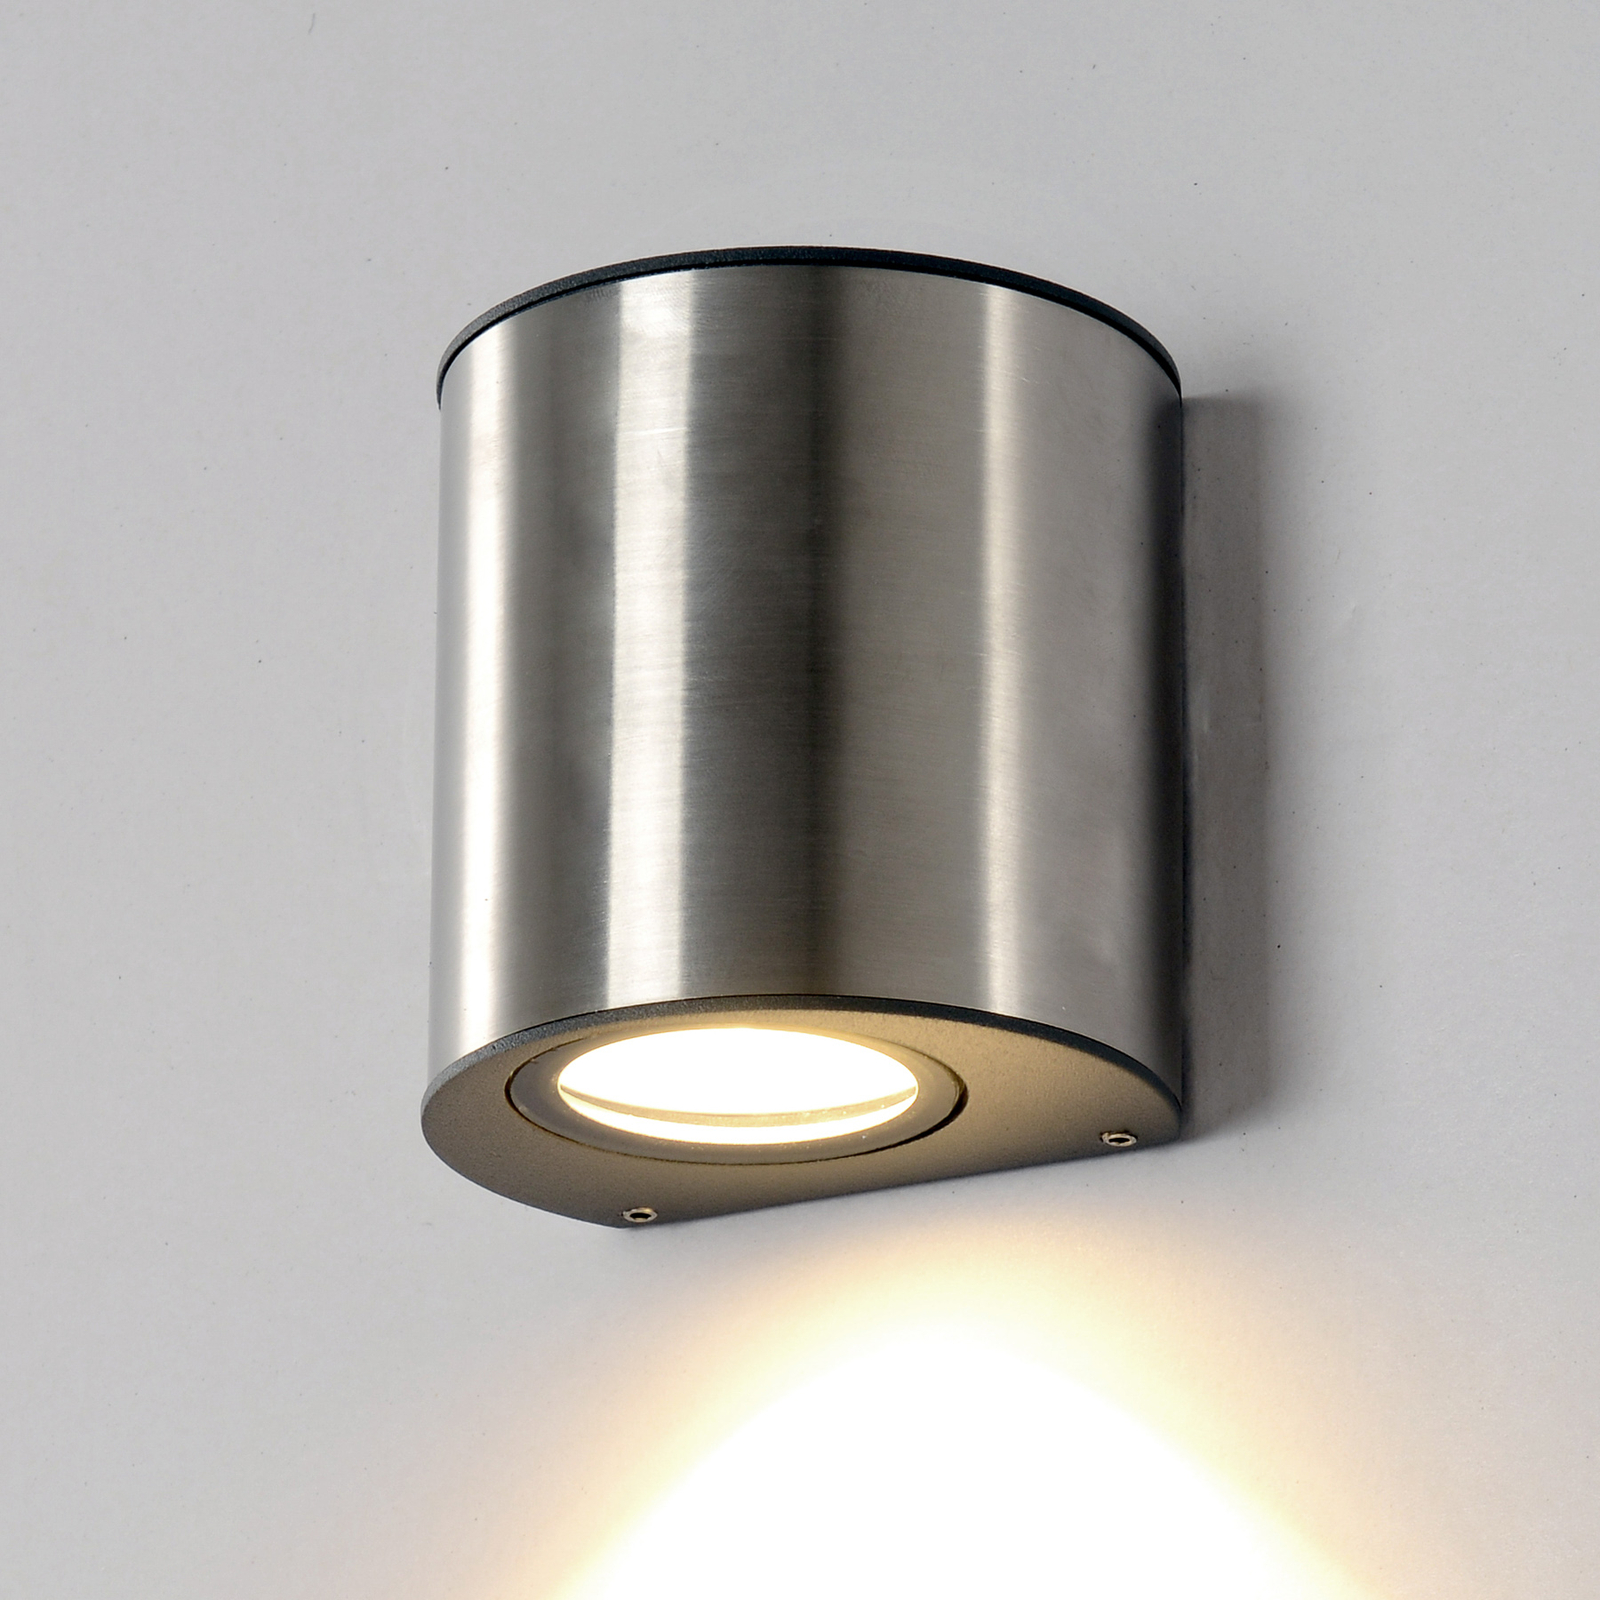 Ilumi LED wall lamp for outdoor areas